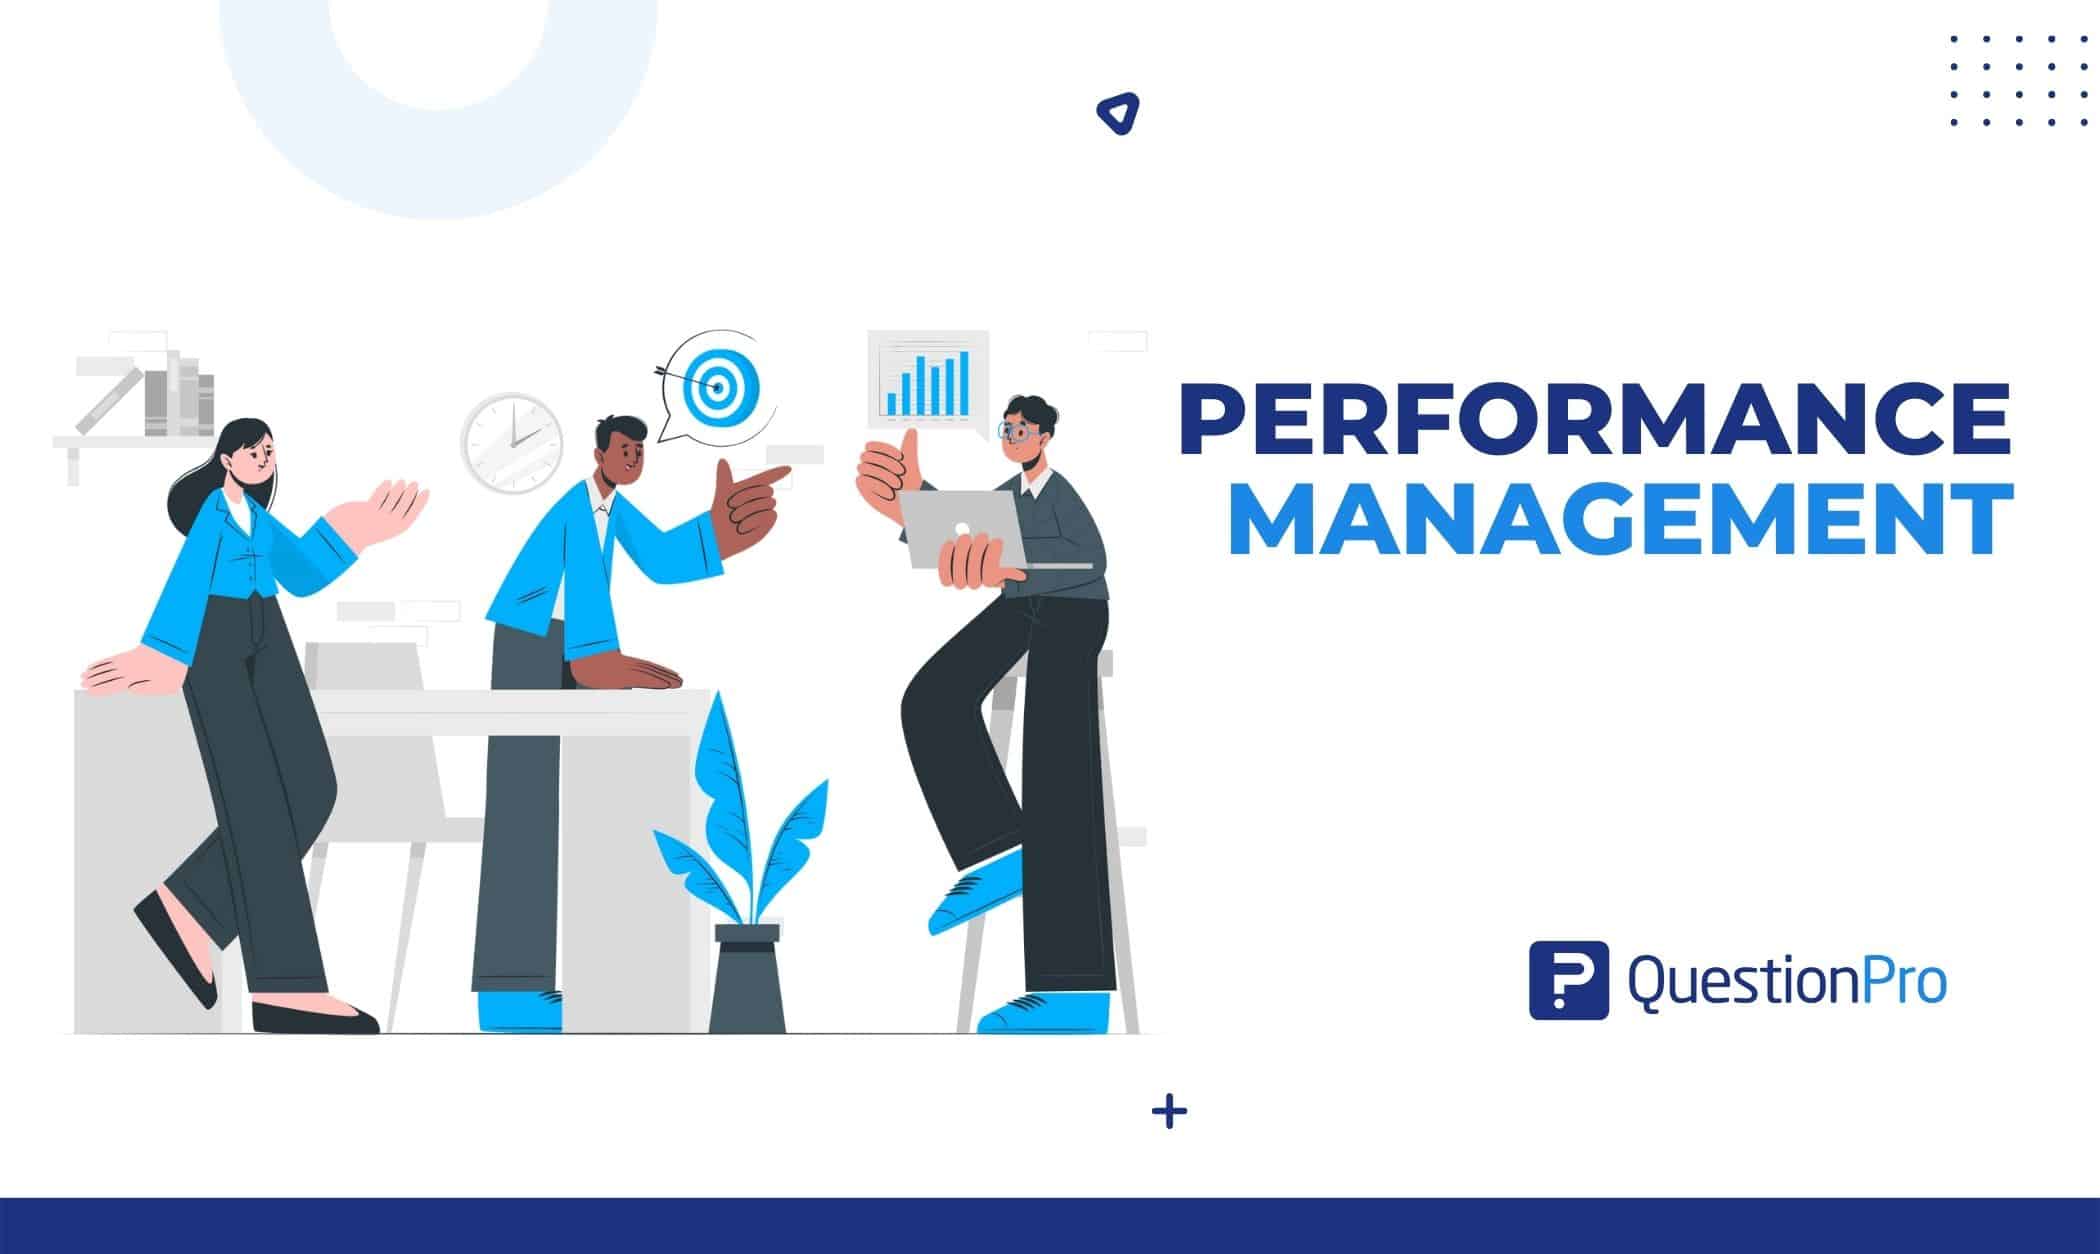 Performance management is a cutting-edge corporate practice that dramatically changes a company's operations. Learn more about it.